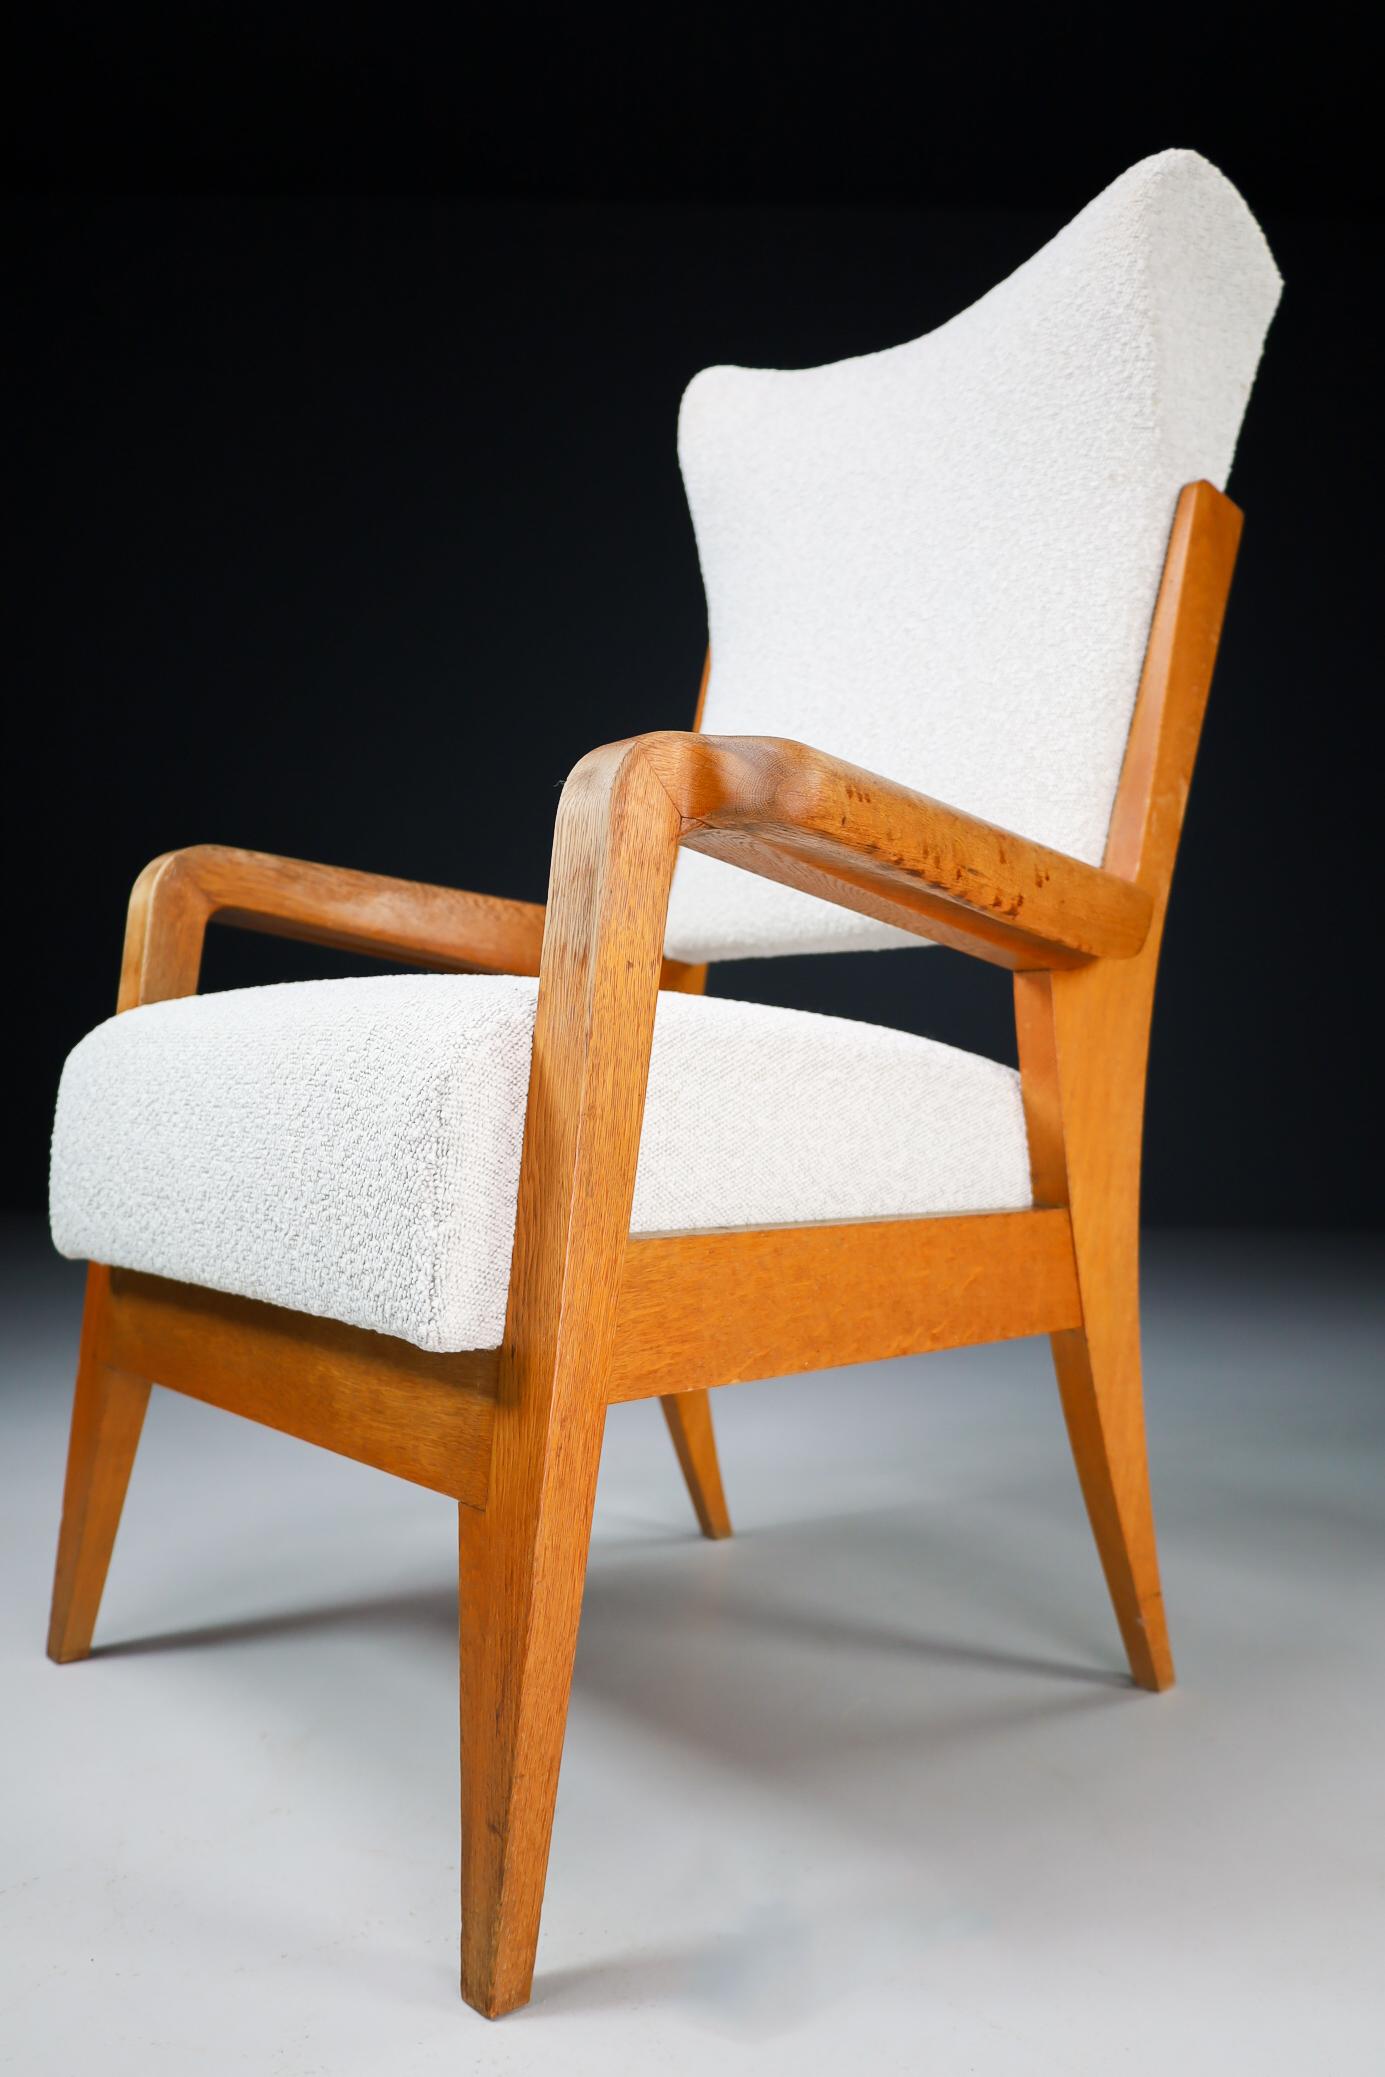 Wing armchair in patinated solid French oak and Re-upholstered Boucle wool fabric, France, 1950s. The grain of the wood is nicely visible and has an amazing good original patina. This chair would make an eye-catching addition to any interior such as